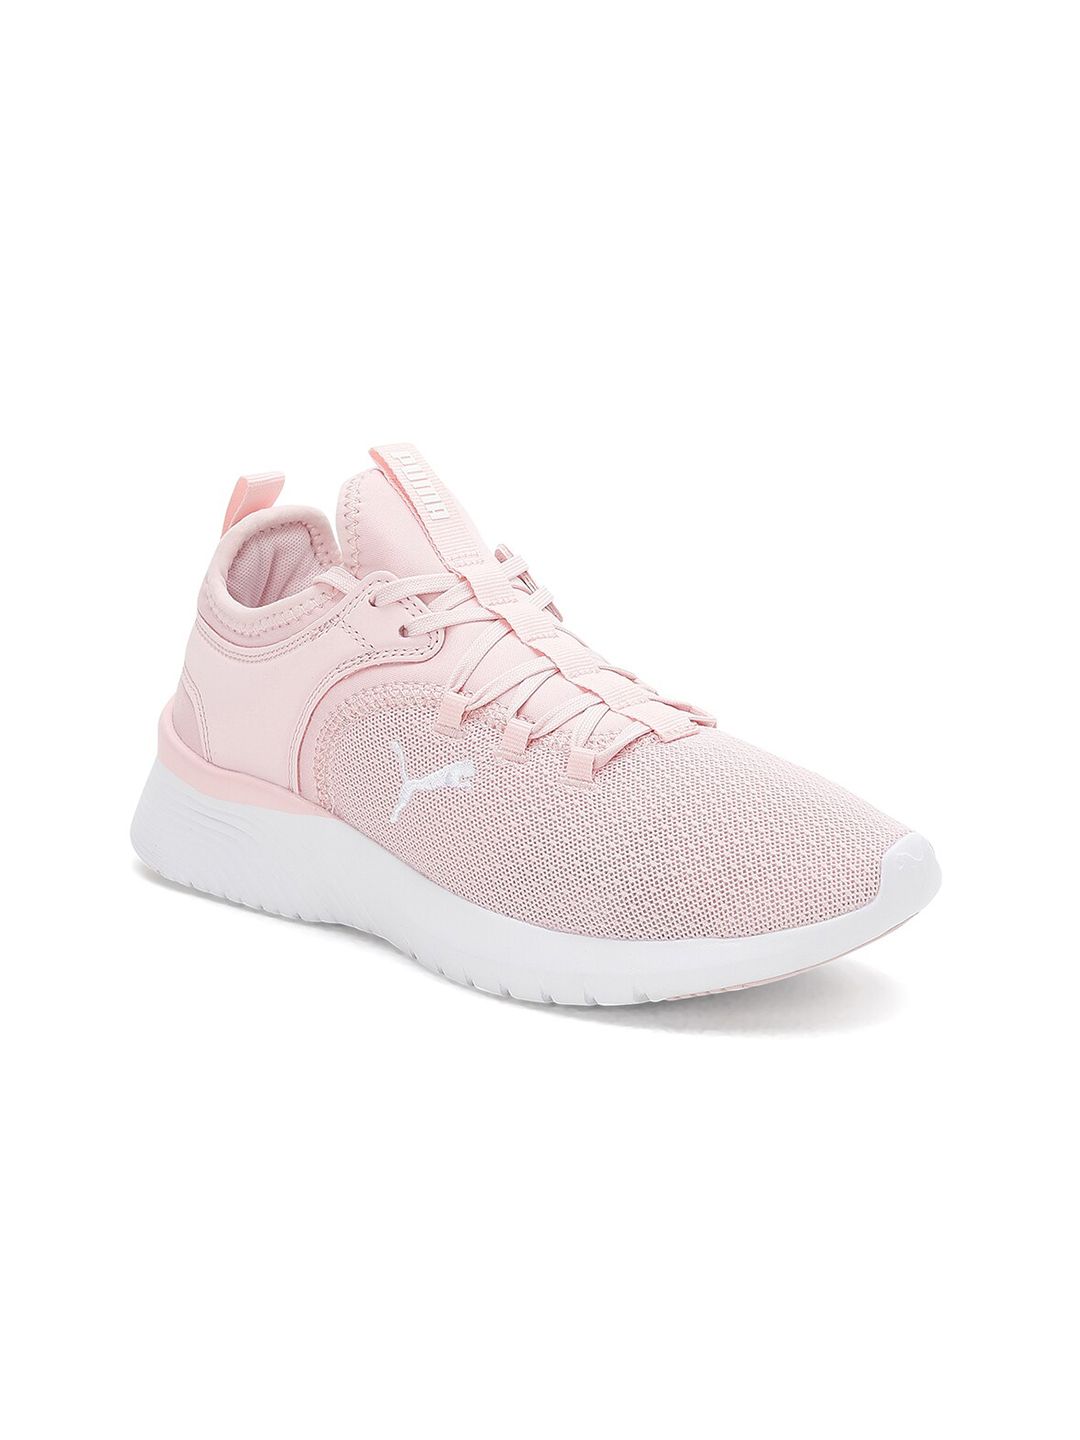 Puma Women Pink Starla Shoes Price in India